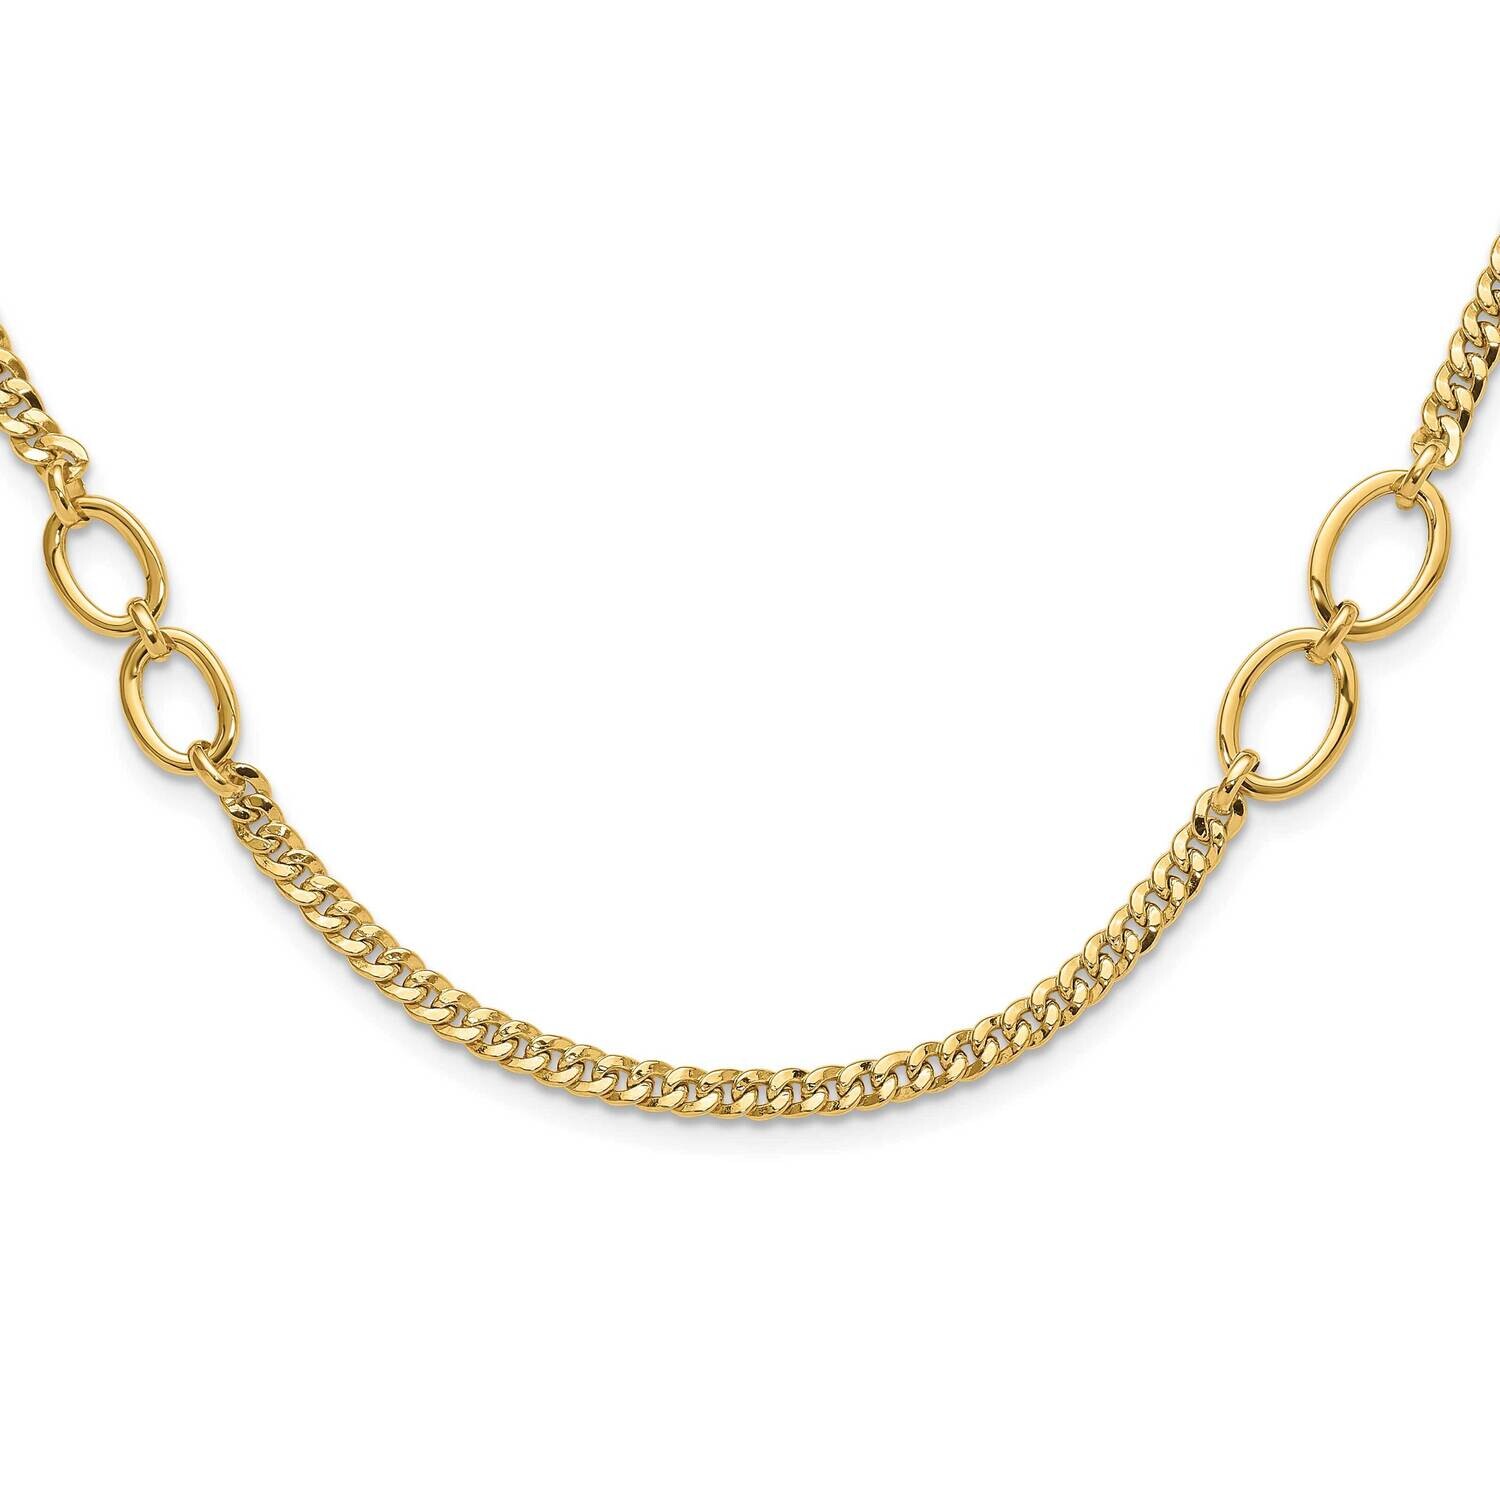 Fancy Oval Links Curb Necklace 14k Polished Gold SF3024-18